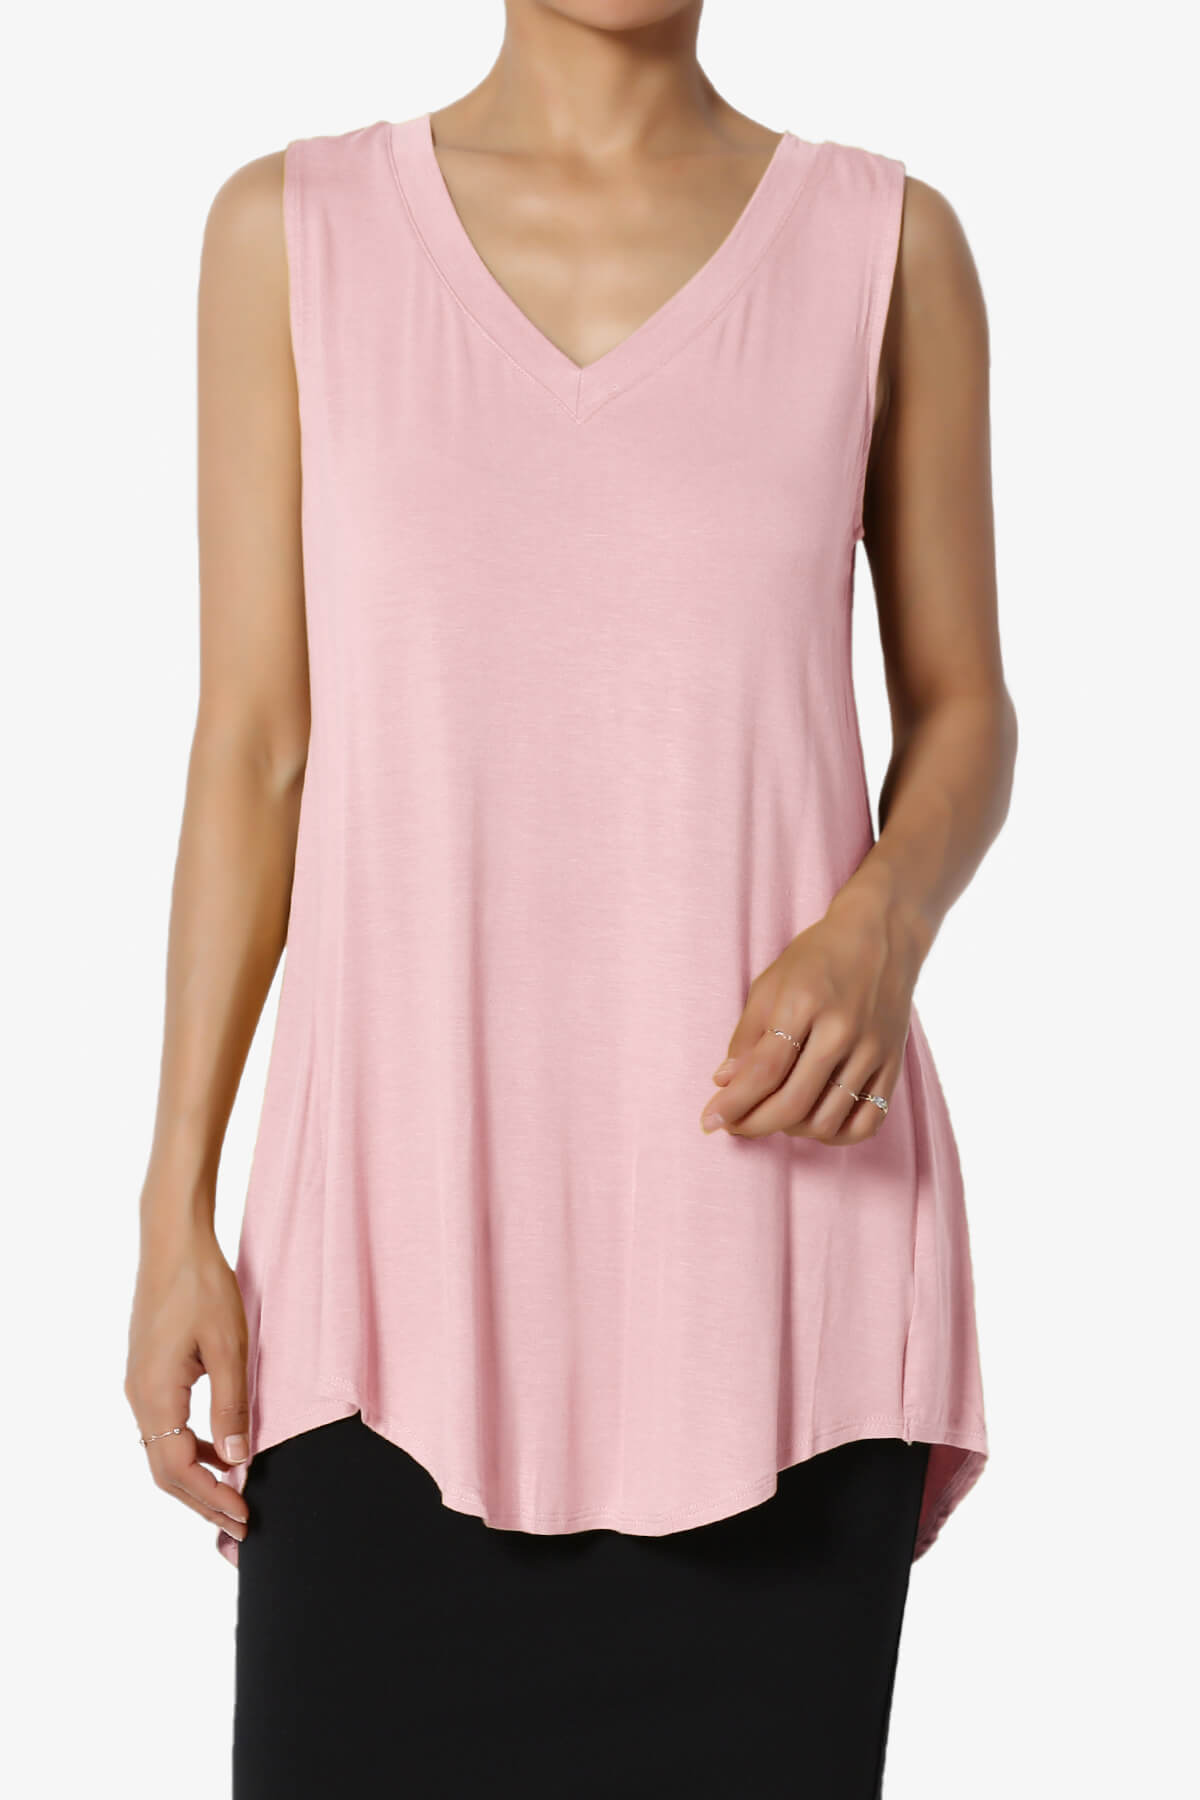 Load image into Gallery viewer, Myles Sleeveless V-Neck Luxe Jersey Top DUSTY PINK_1
